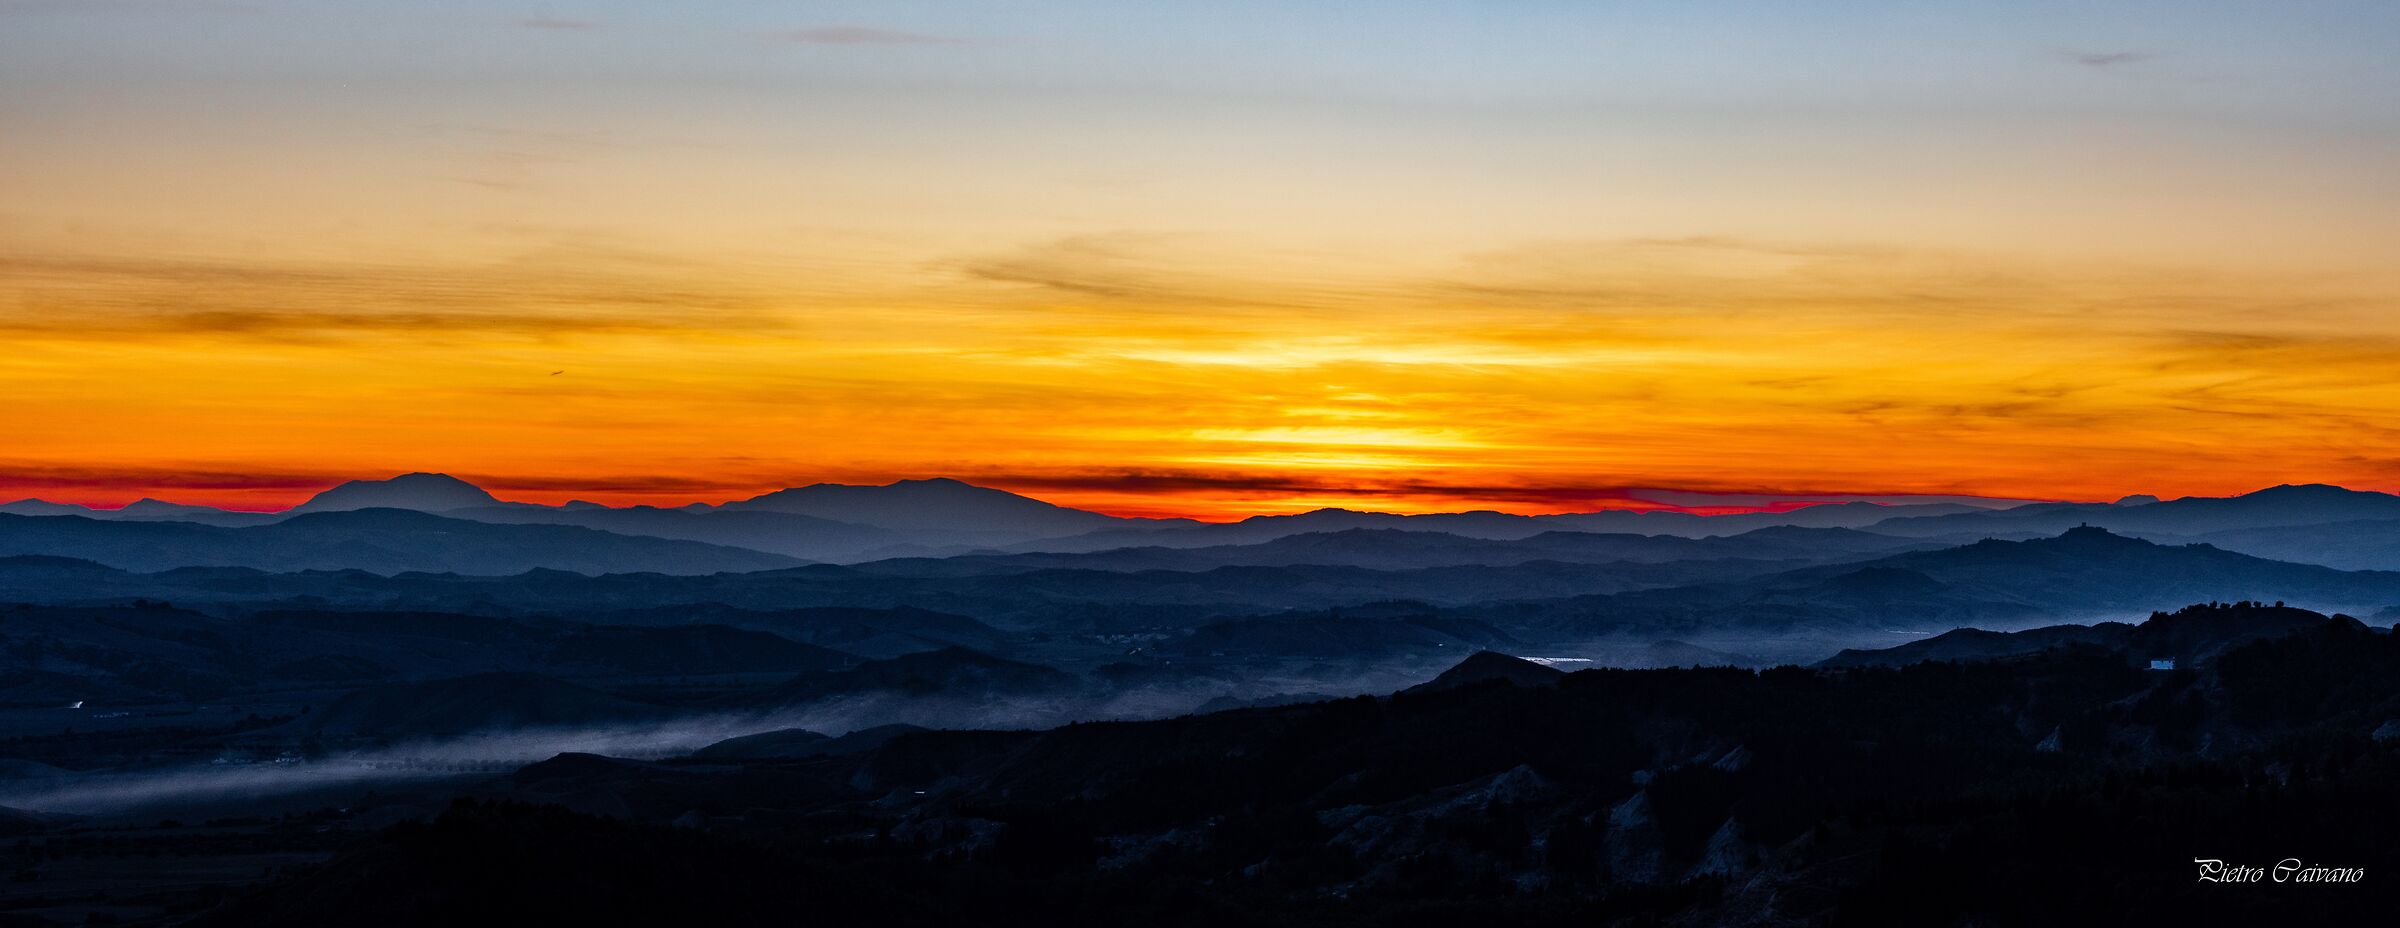 Sunset in the Lucan mountains, taken by Pisticci (MT)...